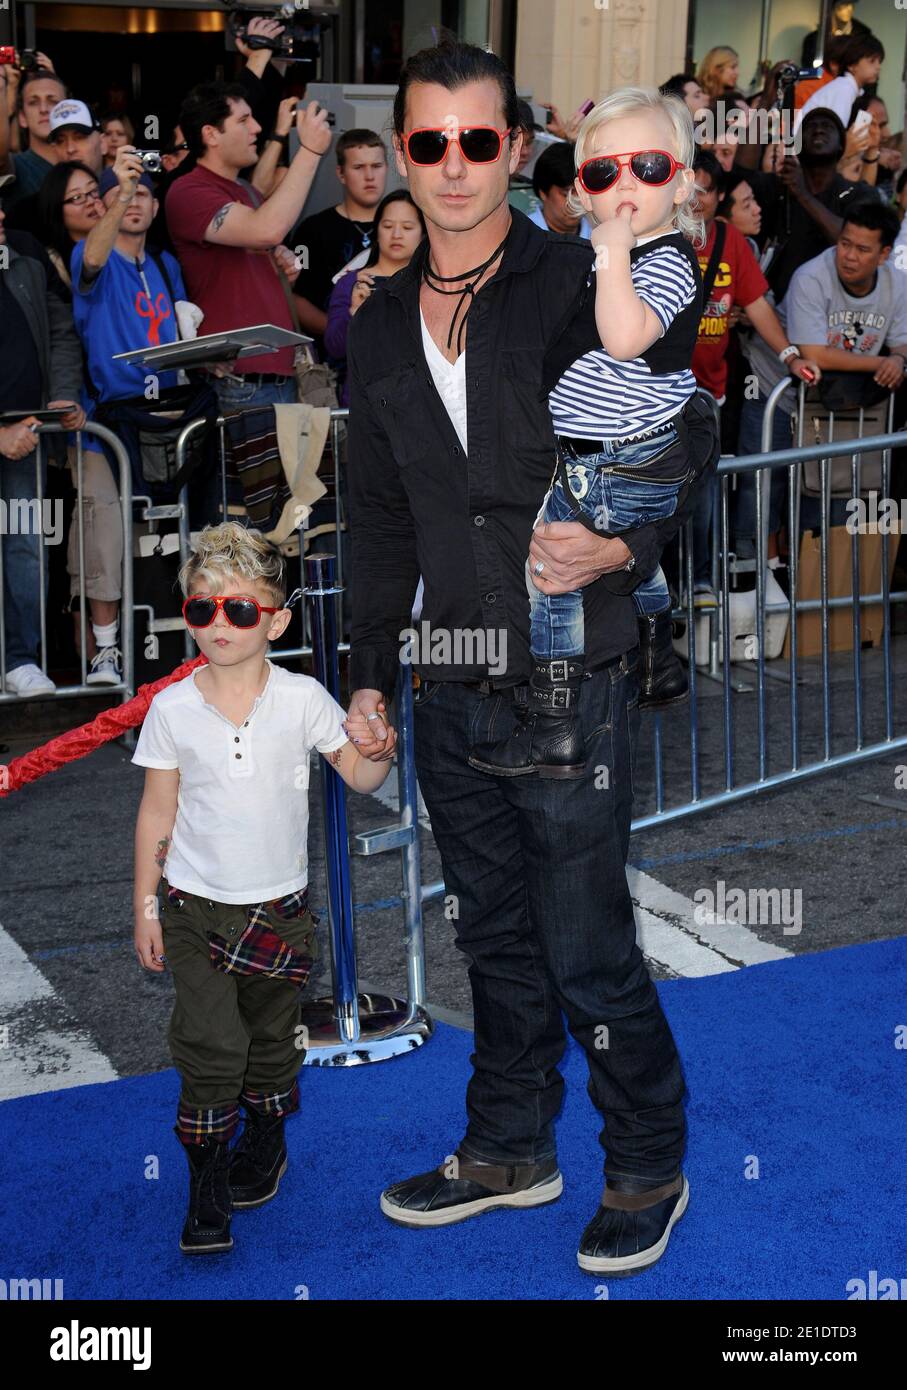 Gavin Rossdale and his kids Kingston and Zuma arriving for Touchstone Pictures's 'Gnomeo And Juliet' premiere at El Capitan Theatre in Los Angeles, CA, USA on January 23, 2011. Photo by Lionel Hahn/ABACAPRESS.COM Stock Photo